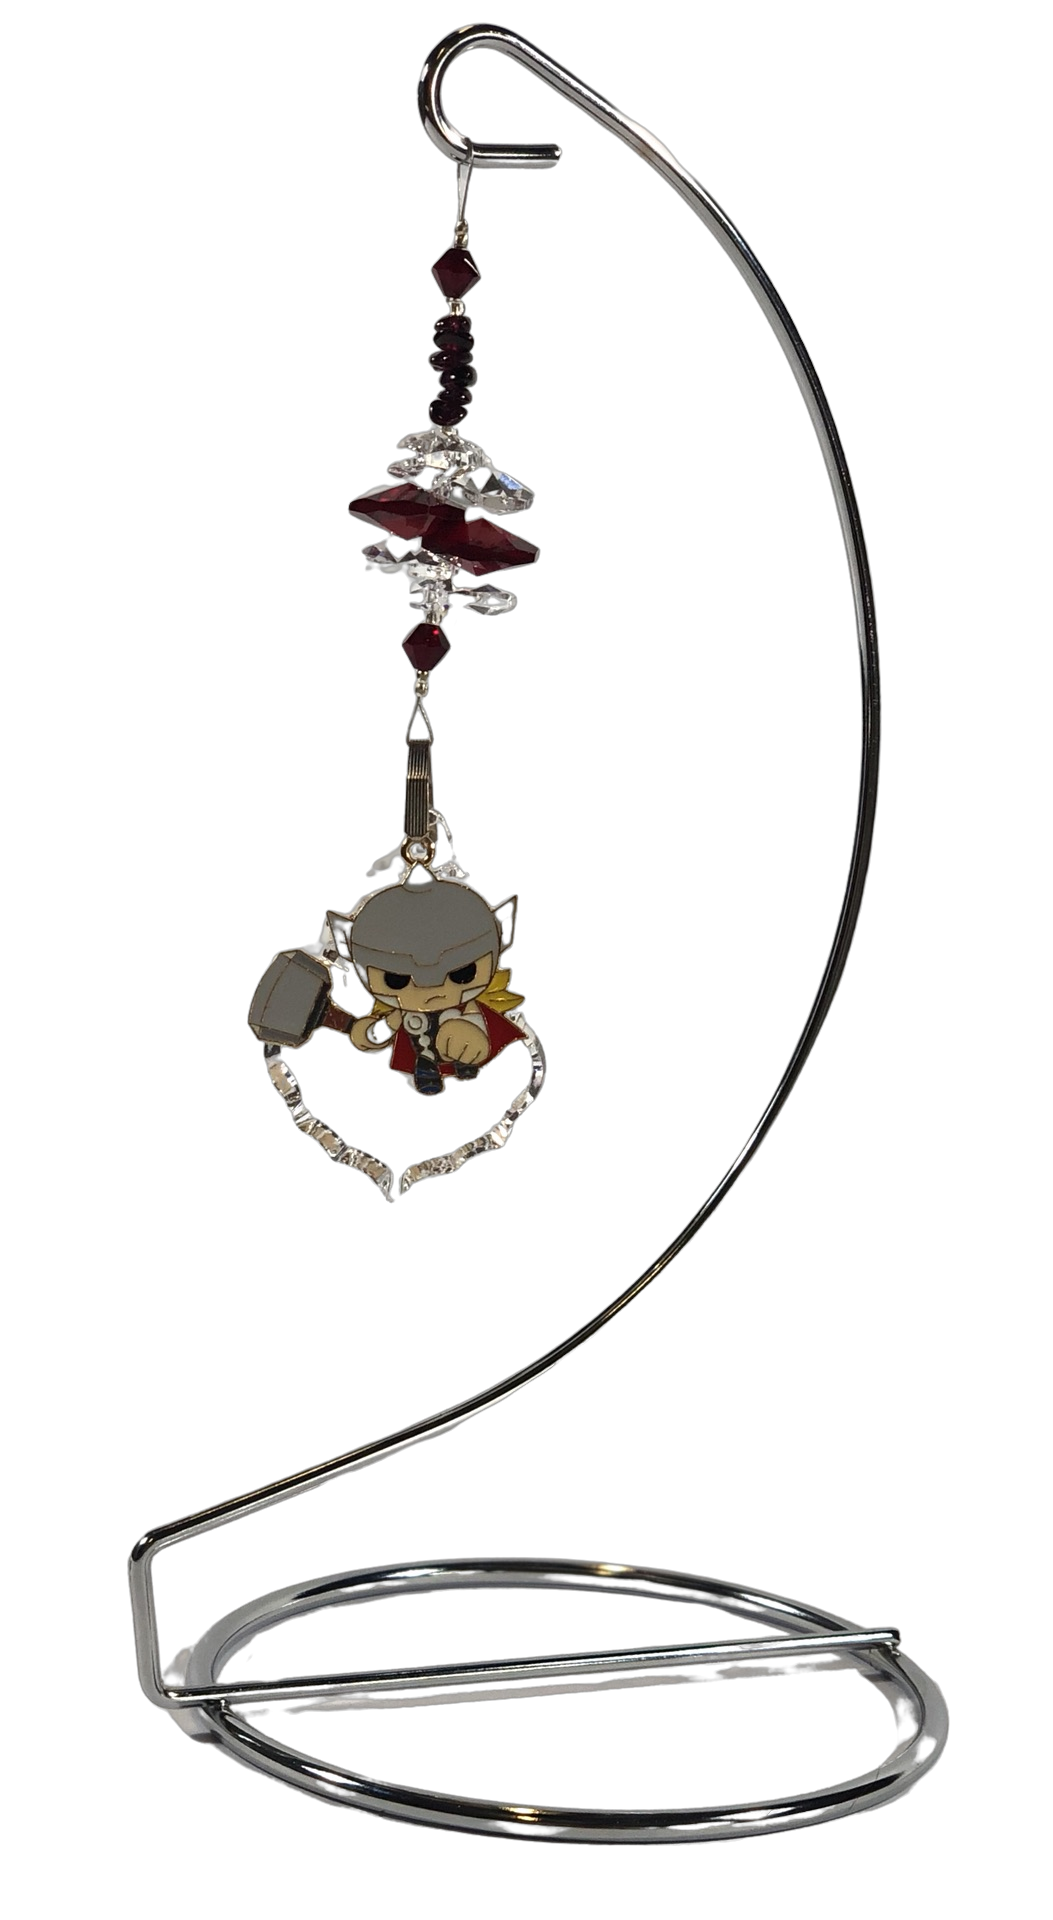 Thor - Marvel crystal suncatcher is decorated with garnet gemstones and come on this amazing stand.